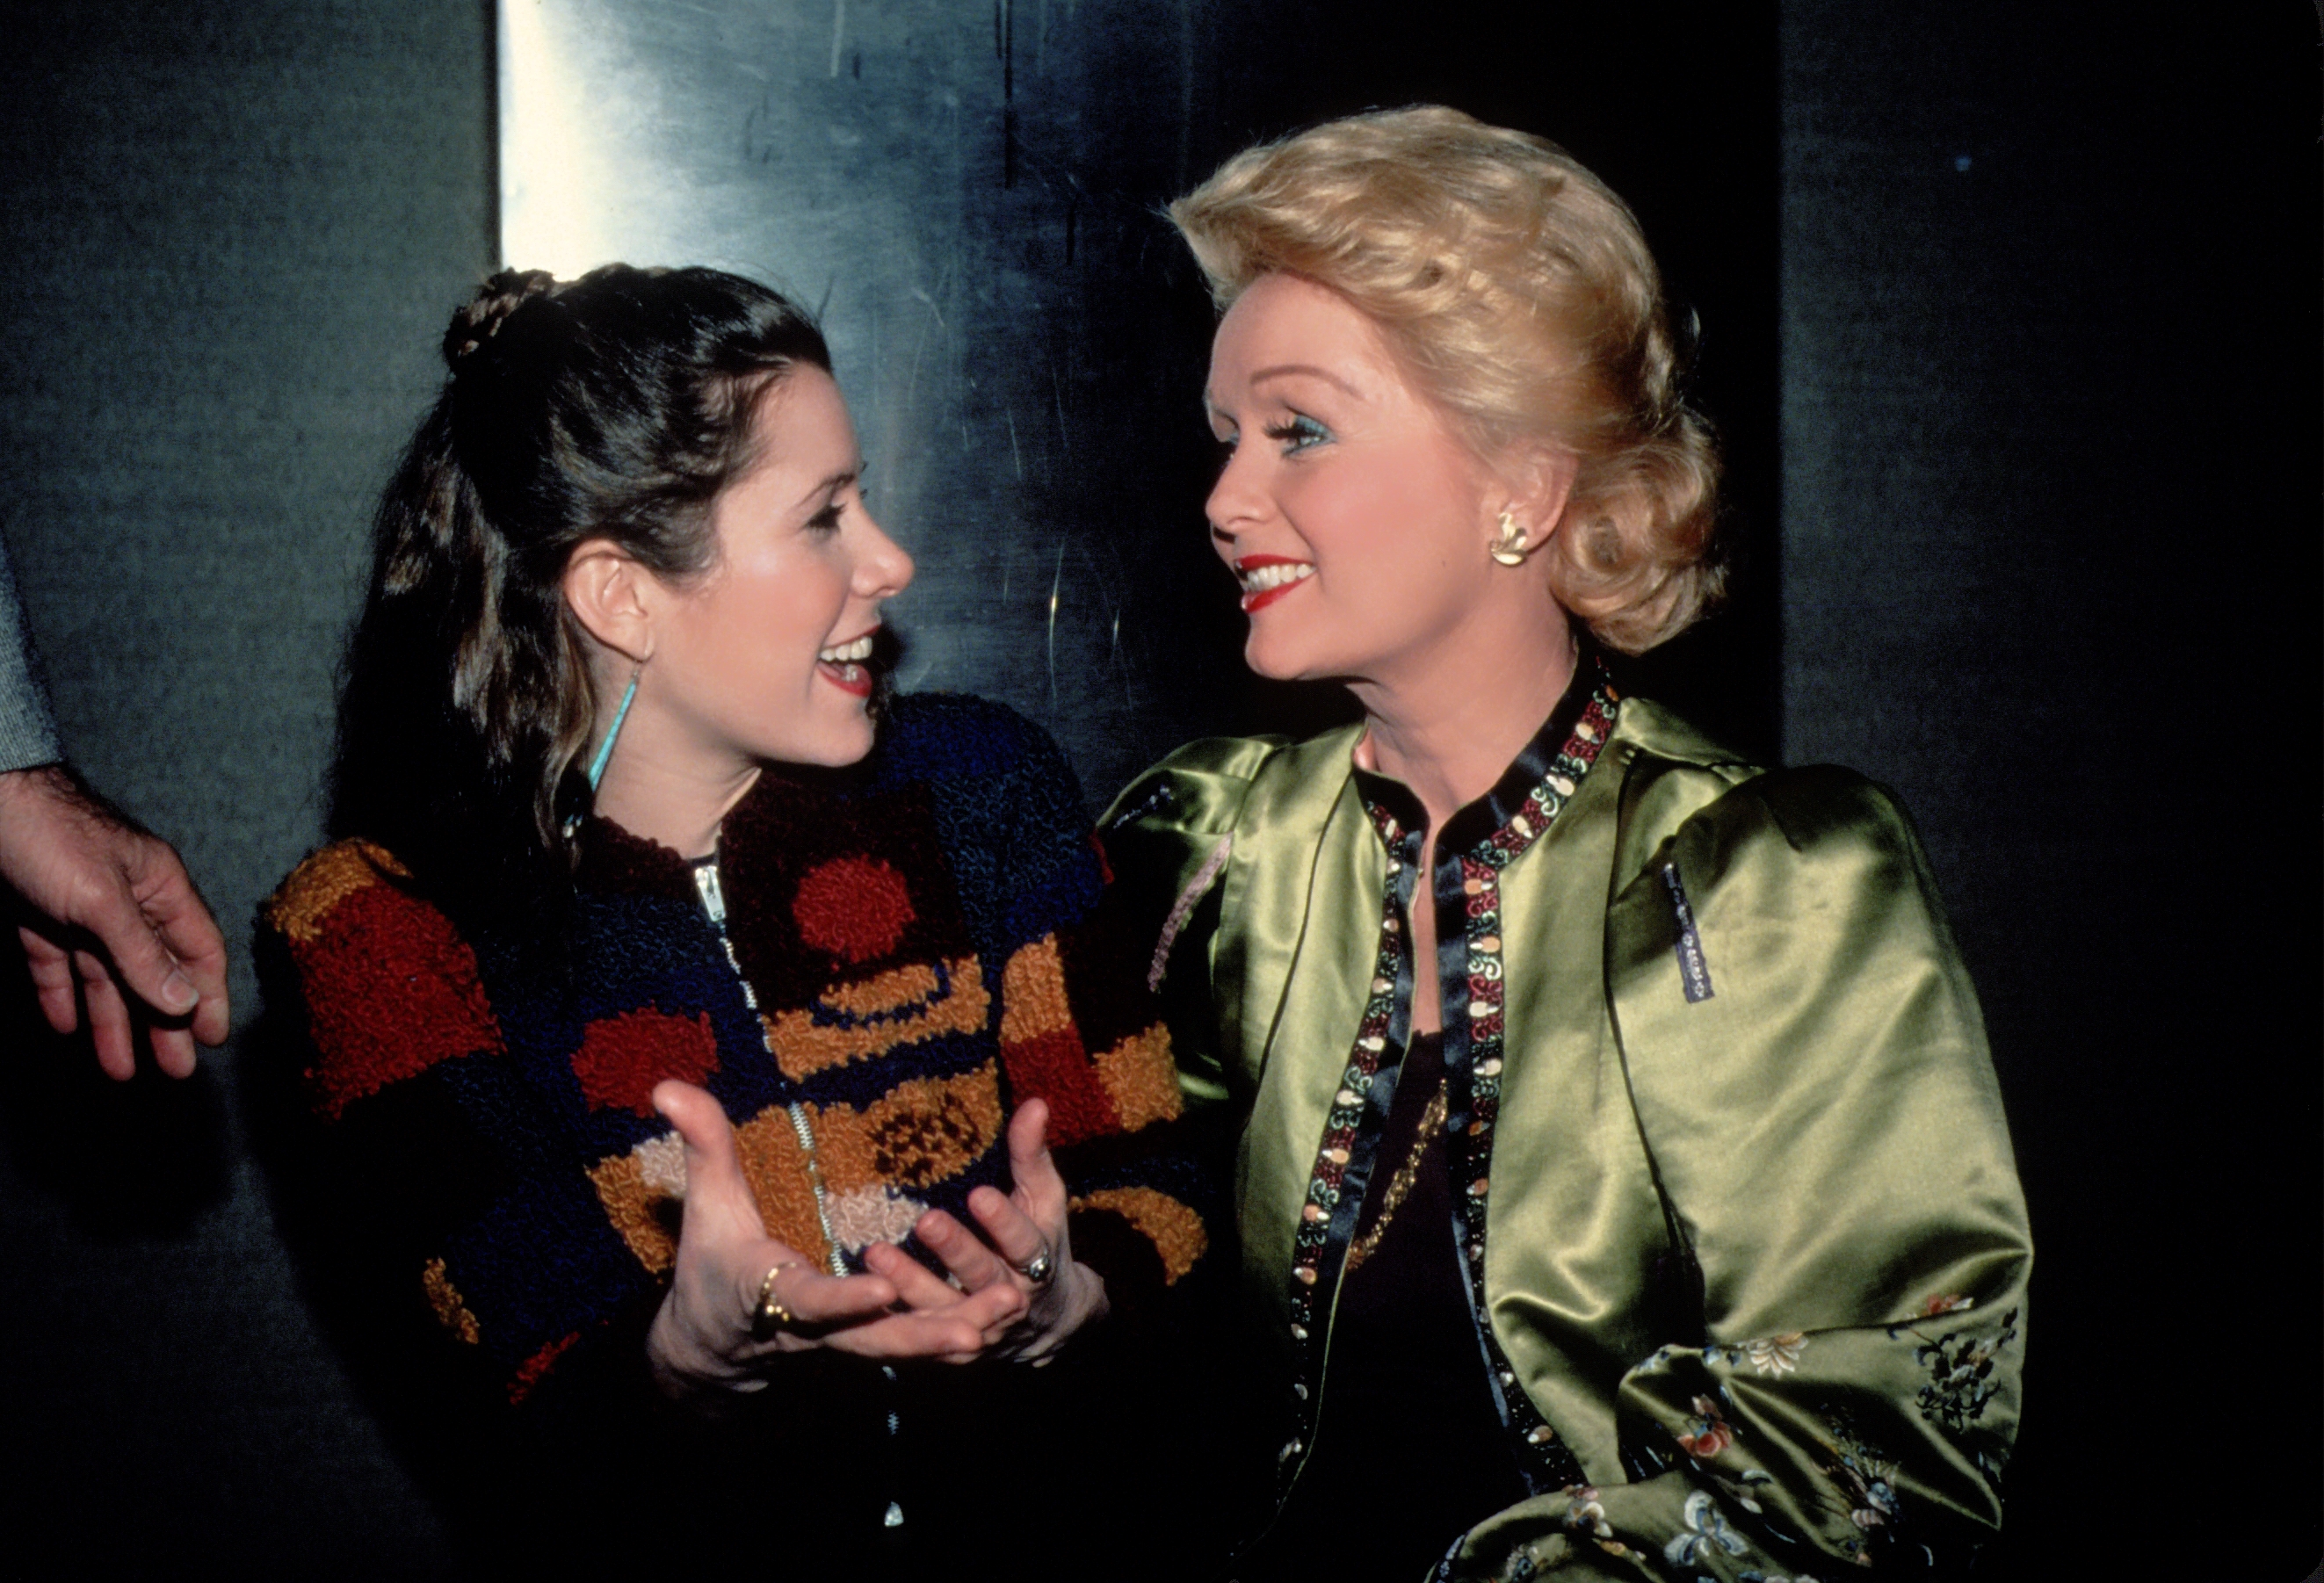 Carrie Fisher and Debbie Reynolds circa 1983 in New York City | Source: Getty Images